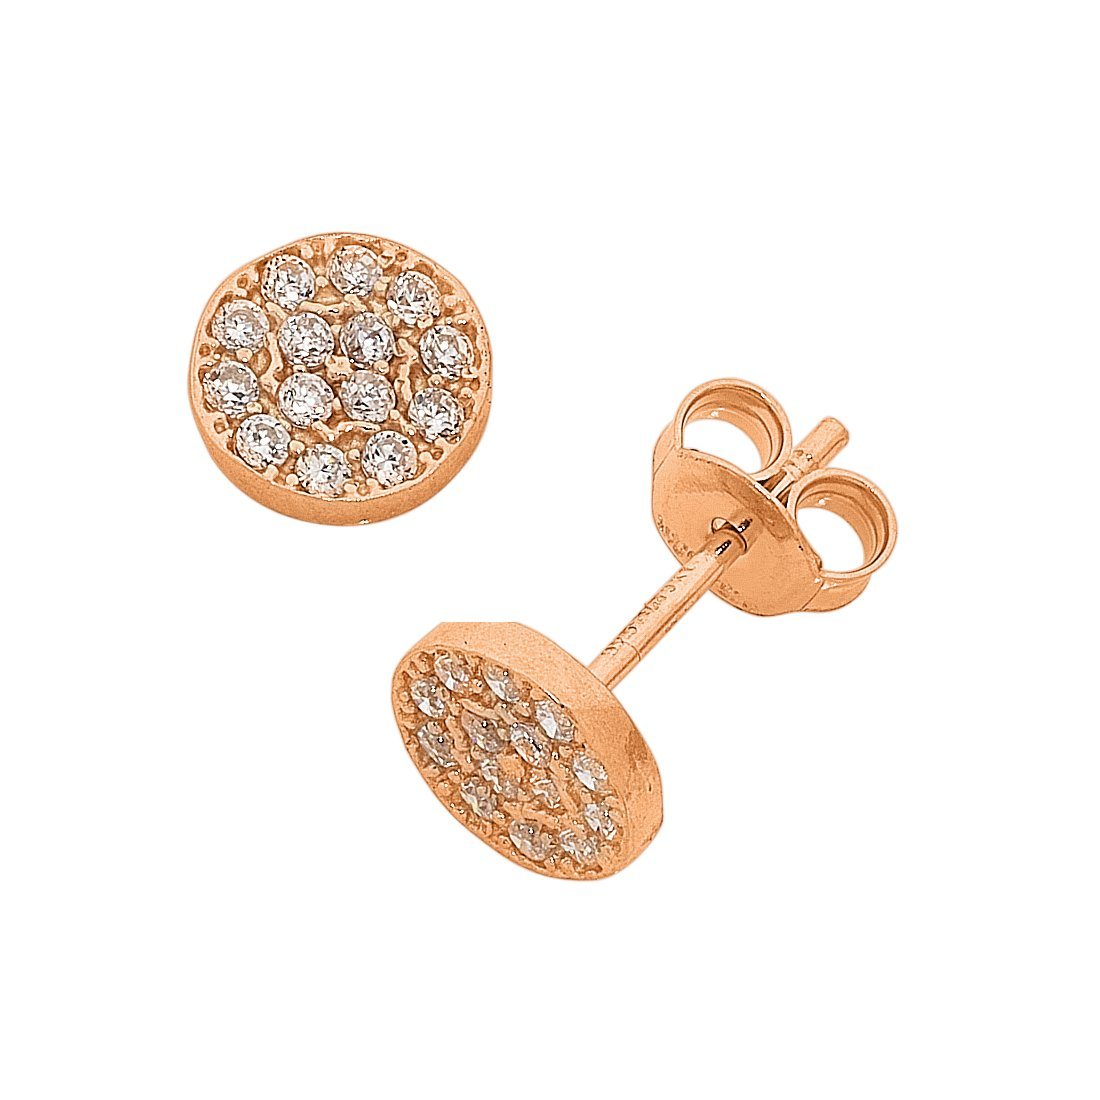 9ct Rose Gold Infused Cubic Zirconia Round Stud Earrings Earrings Bevilles 